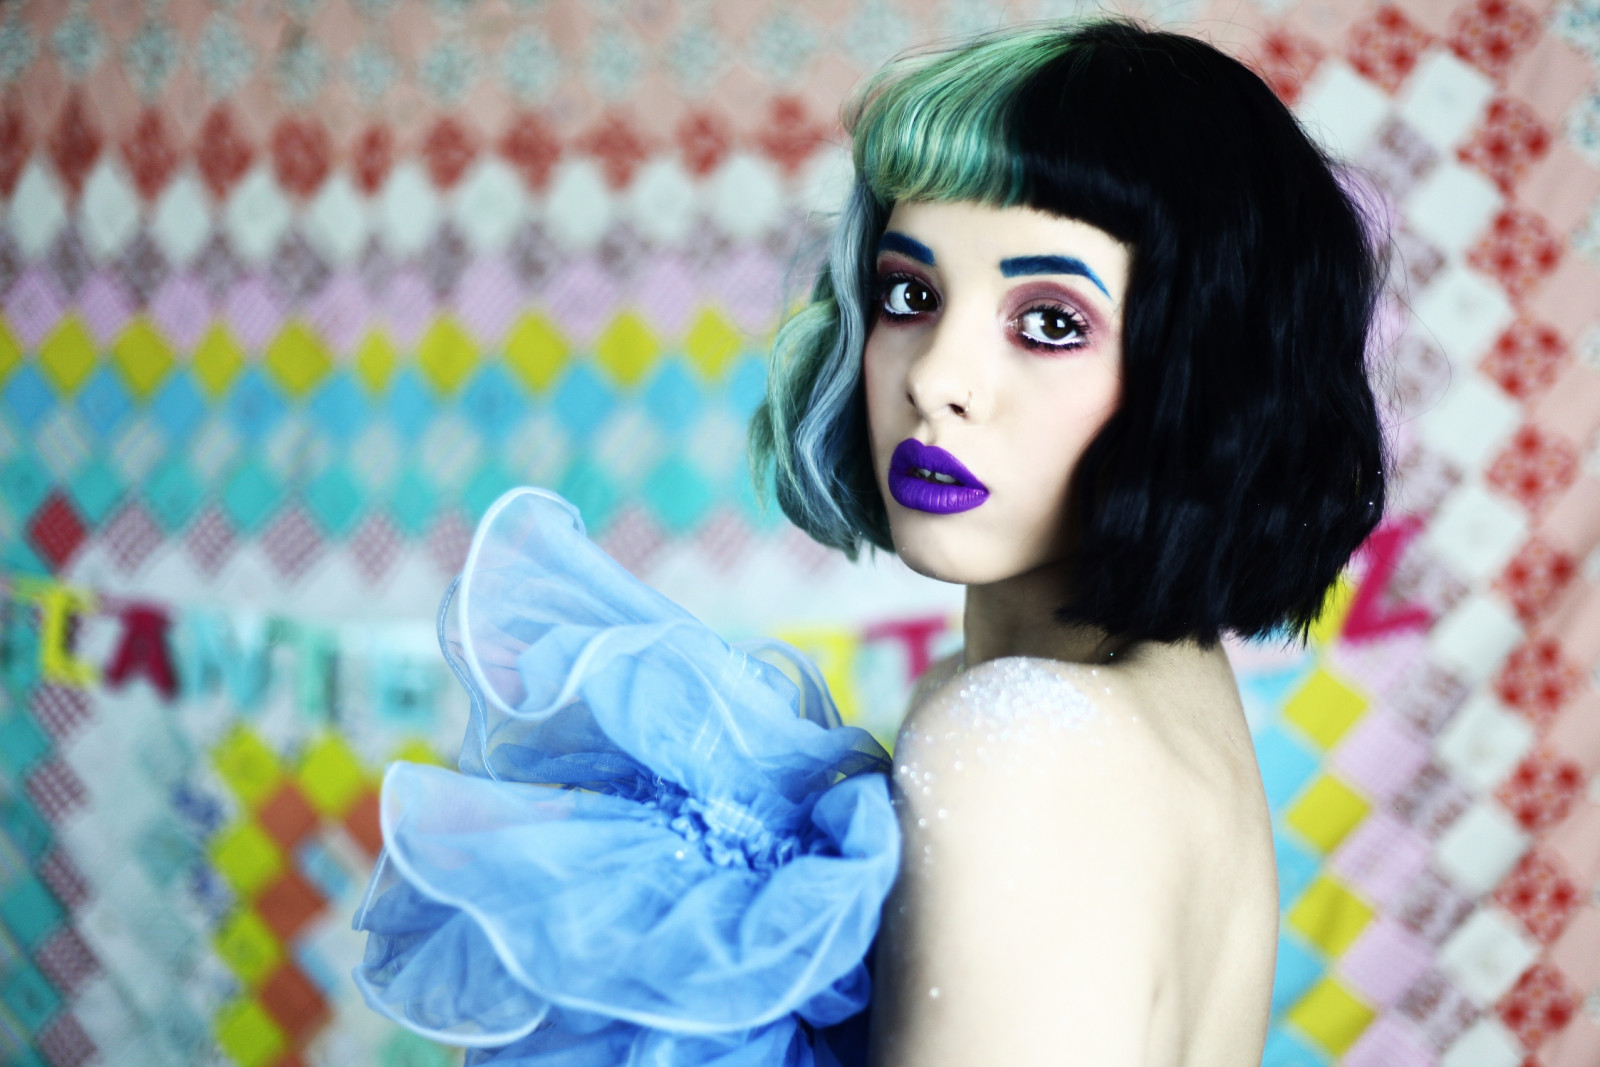 melanie-martinez-releases-another-music-video